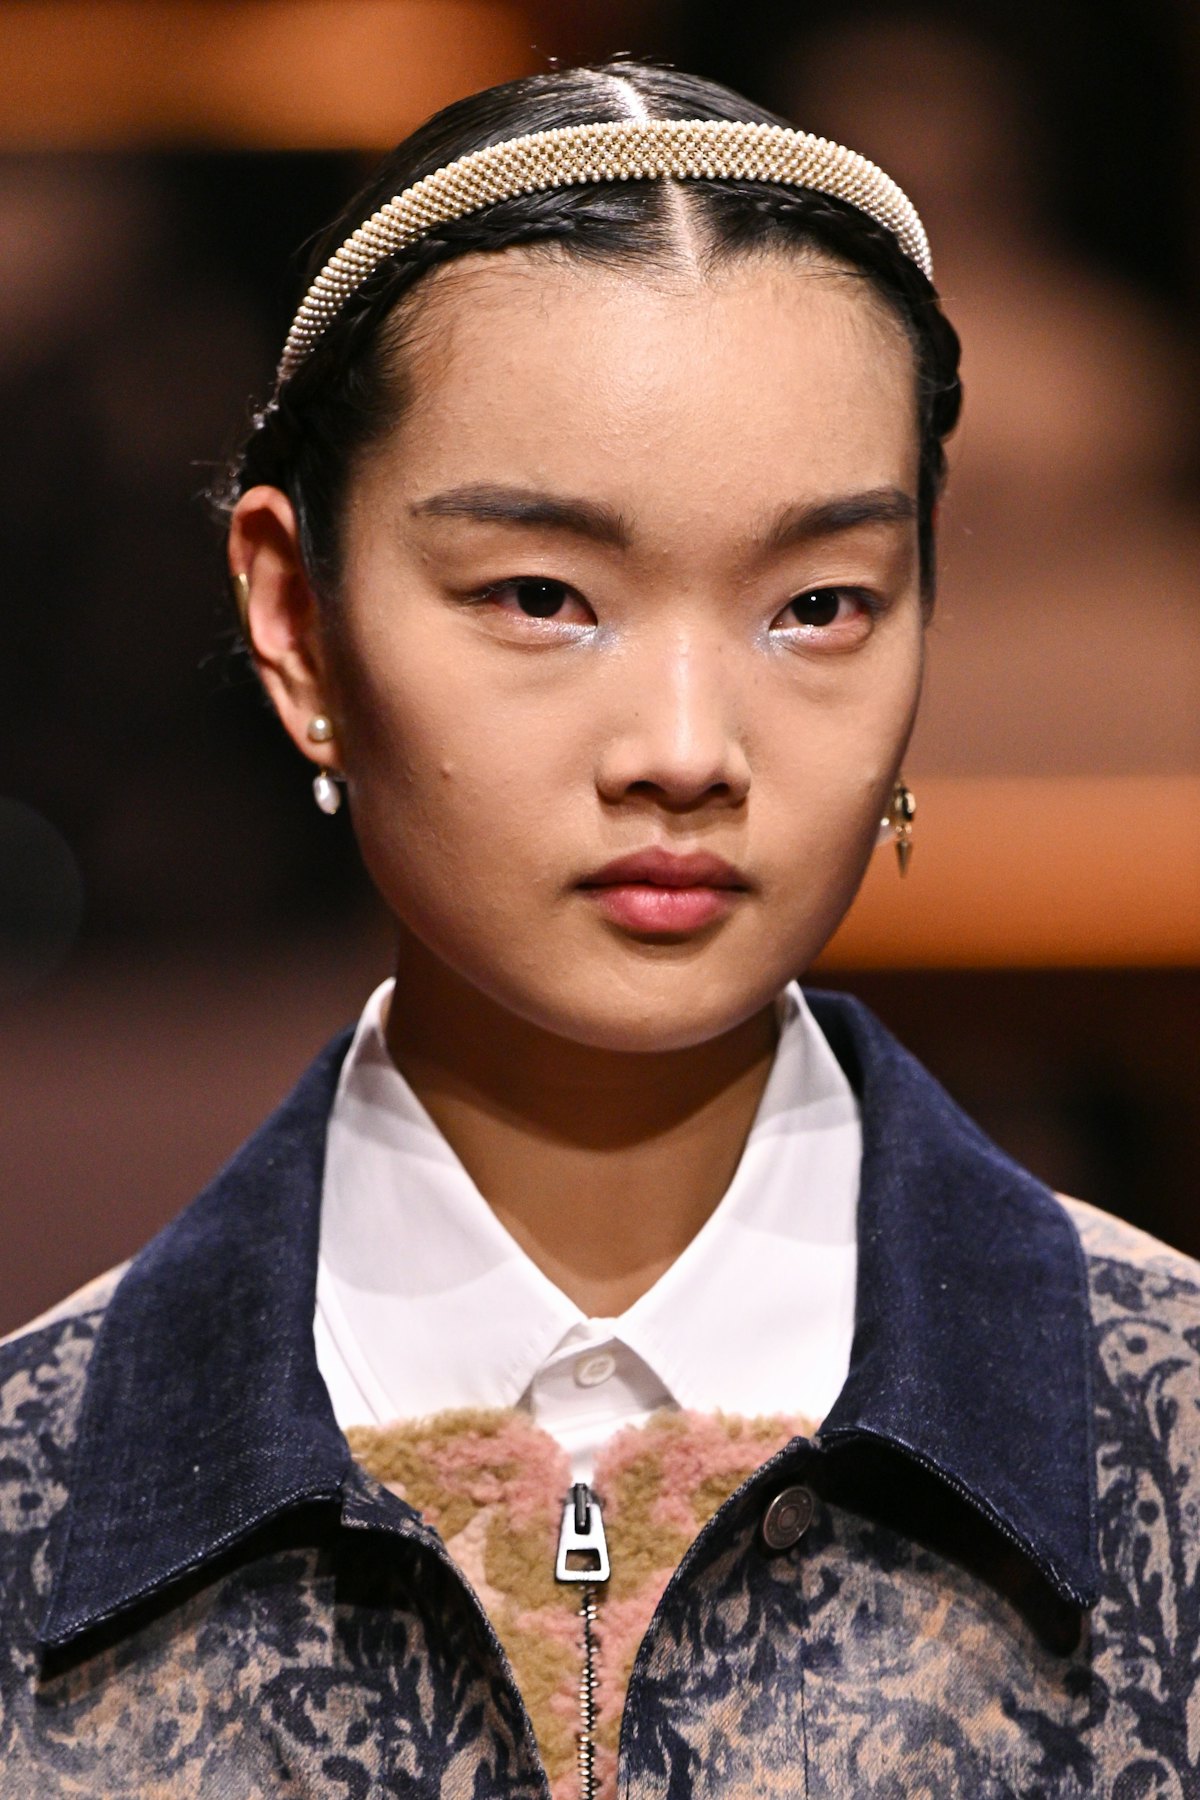 At Paris Fashion Week F/W 2022, the silver eyeshadow at Dior was one of the best makeup looks.